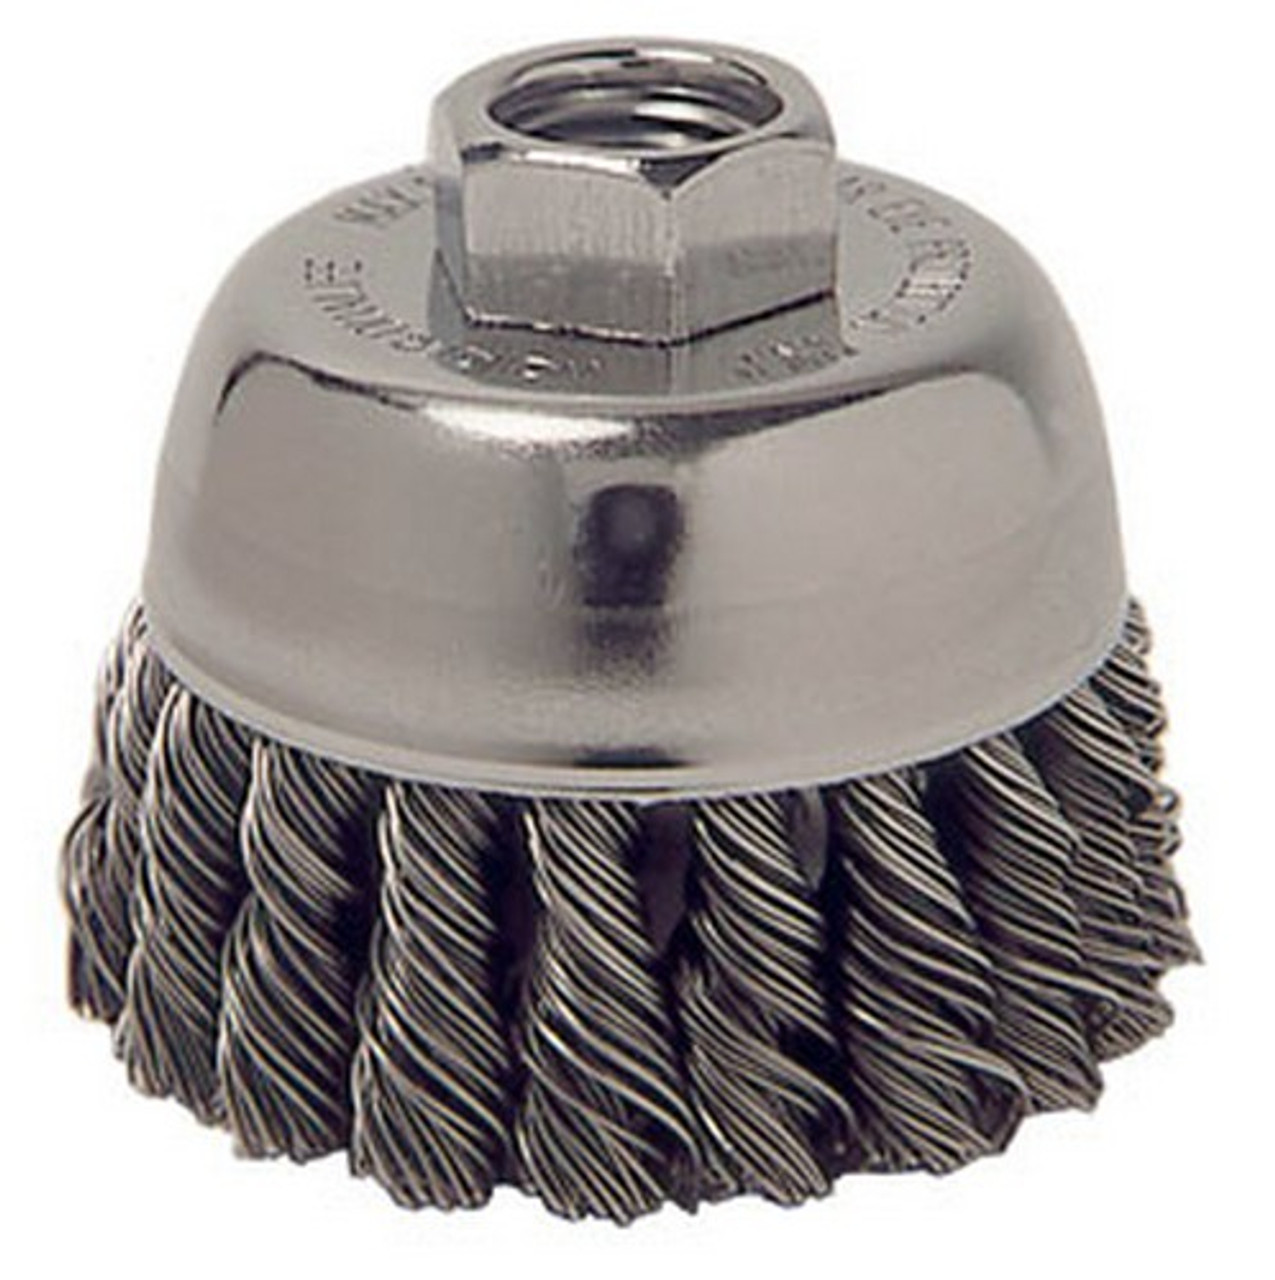 ATD Tools 8233 2-3/4 Knot-Style Cup Brush | JB Tools